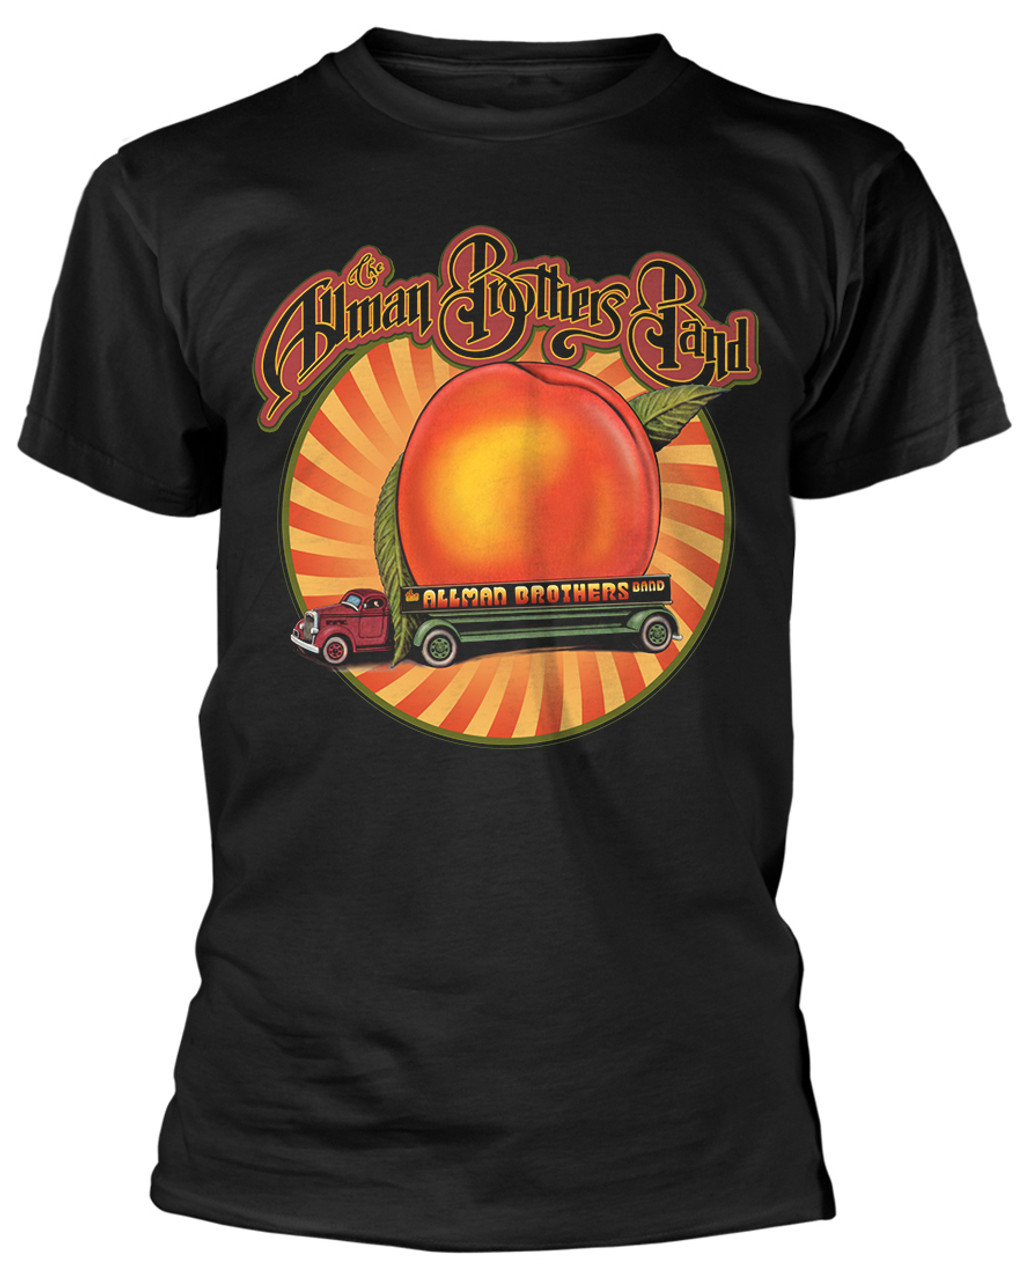 The Allman Brothers Band 'Peach Lorry' T-Shirt